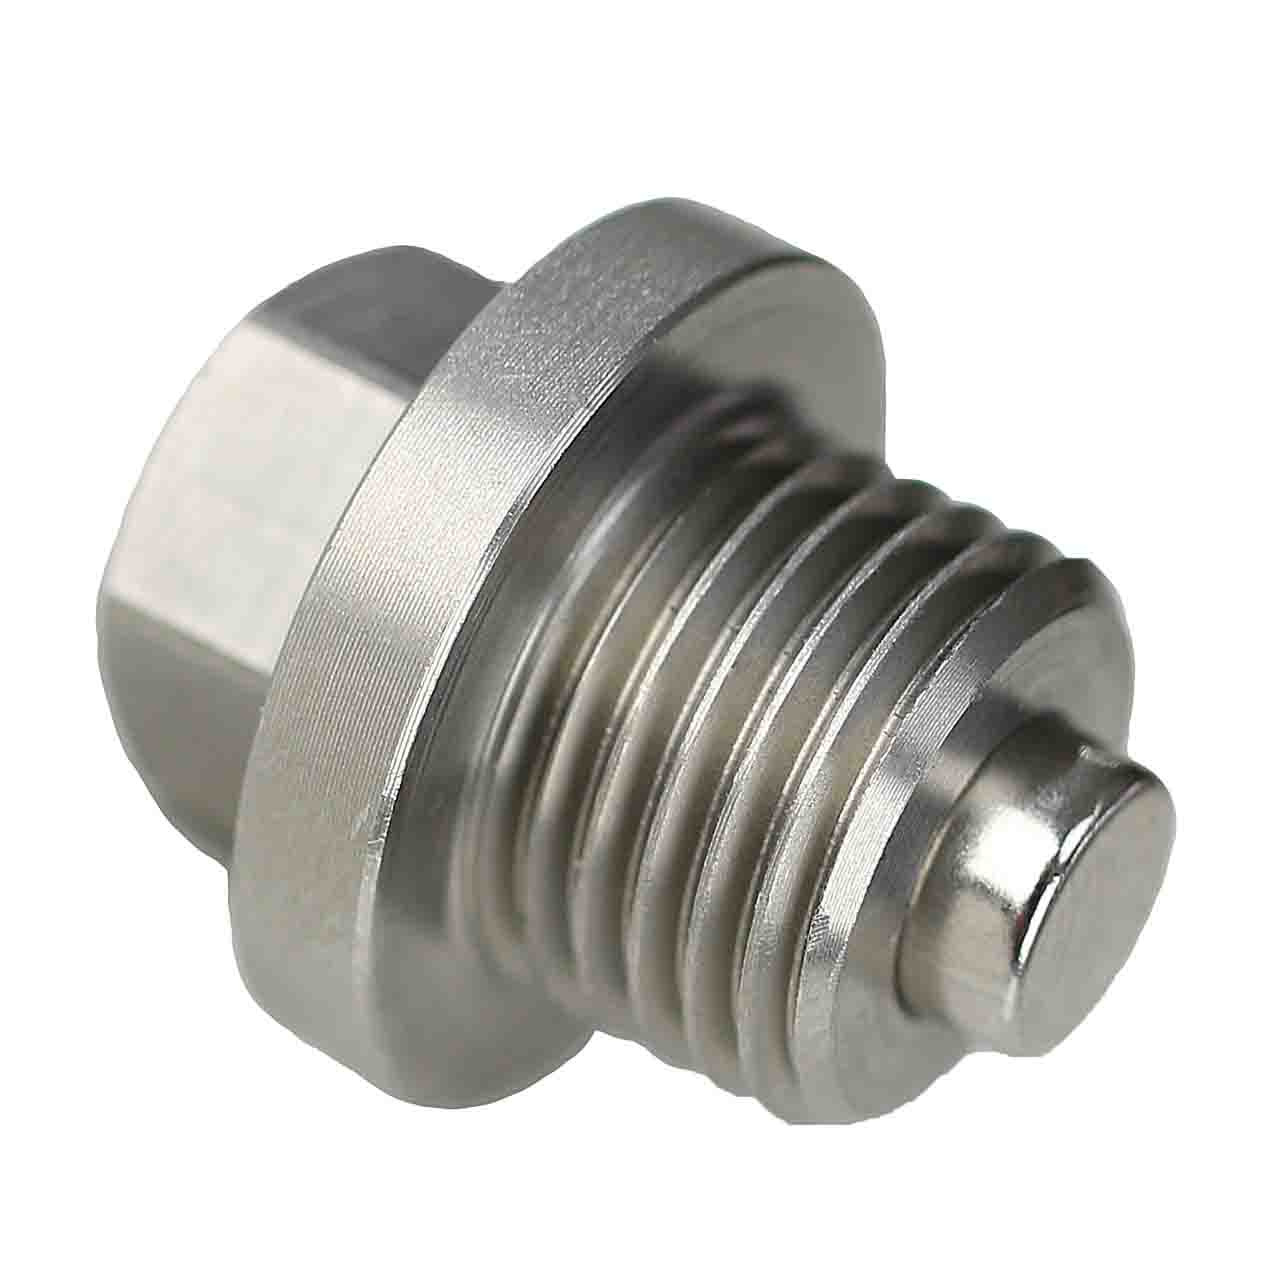 328-280 for MG Midget - Stainless Steel Magnetic Oil Drain Plug with Neodymium Magnet - Made In USA